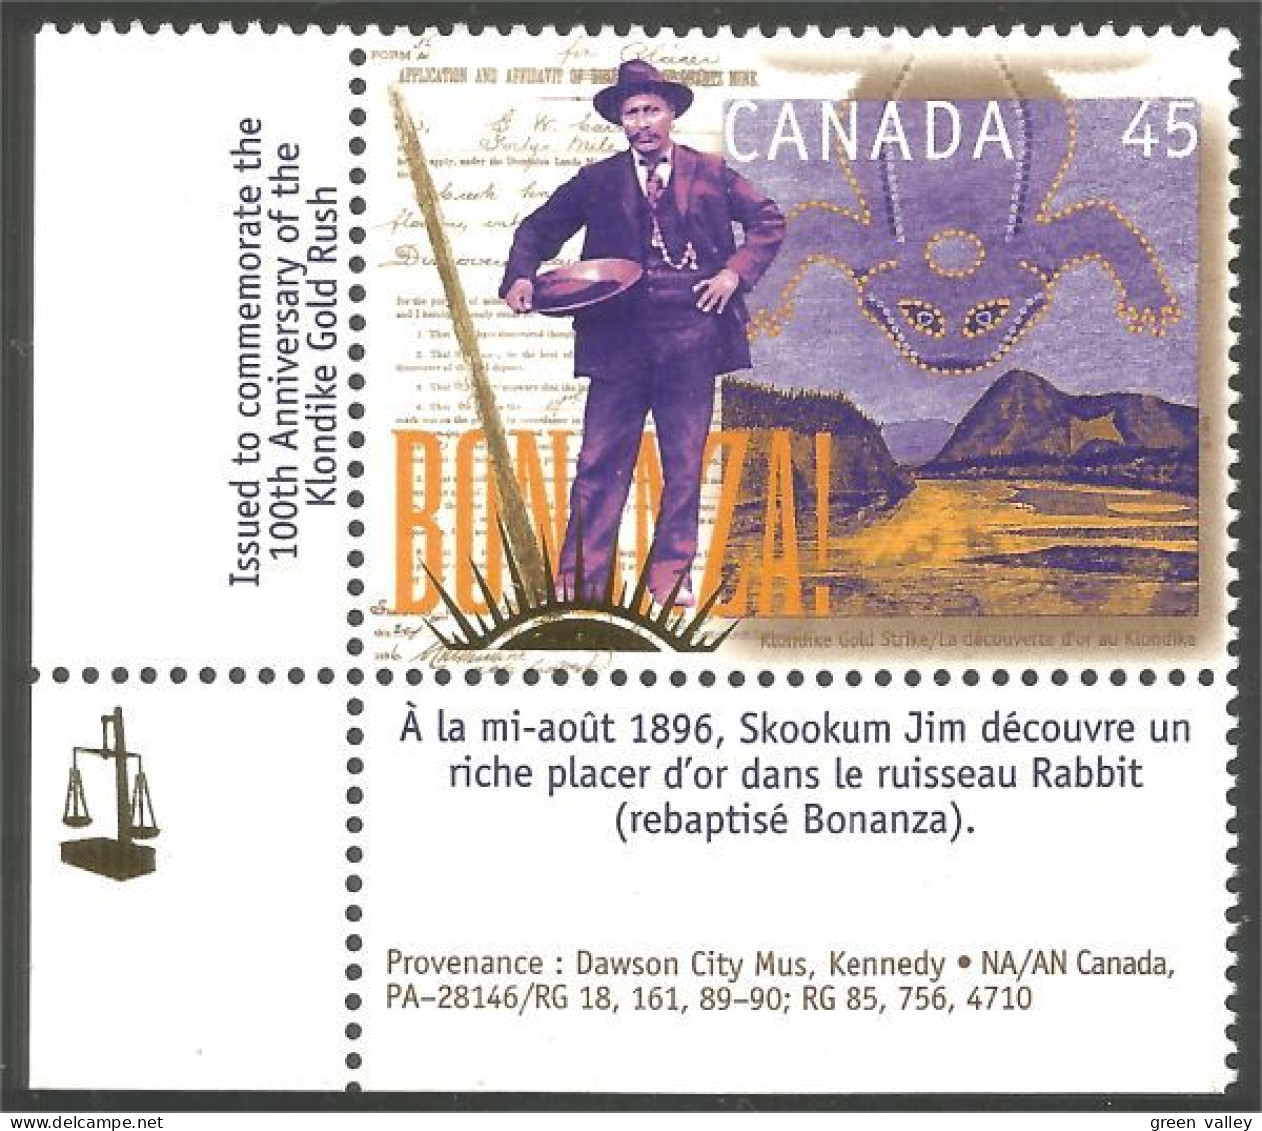 Canada Decouverte Or Klondike Gold First Claim English MNH ** Neuf SC (C16-06aba) - Unused Stamps